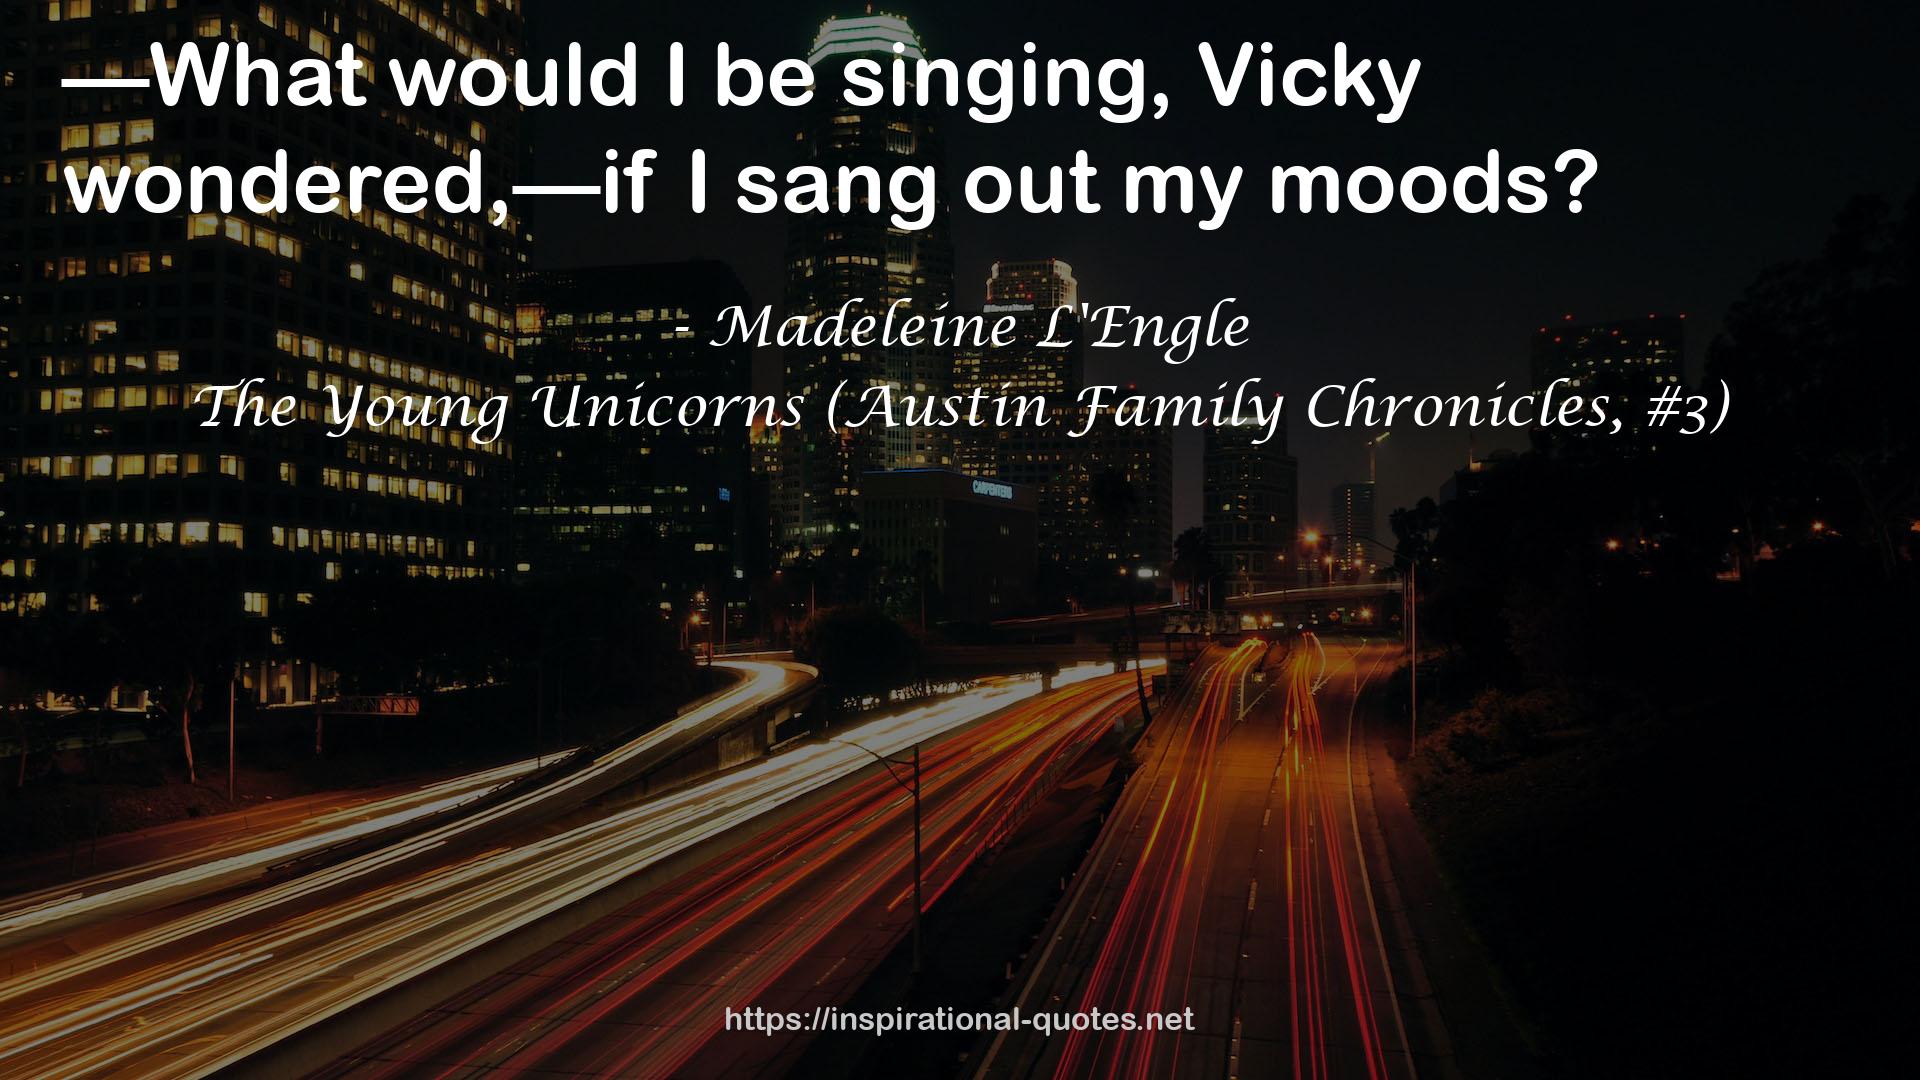 The Young Unicorns (Austin Family Chronicles, #3) QUOTES